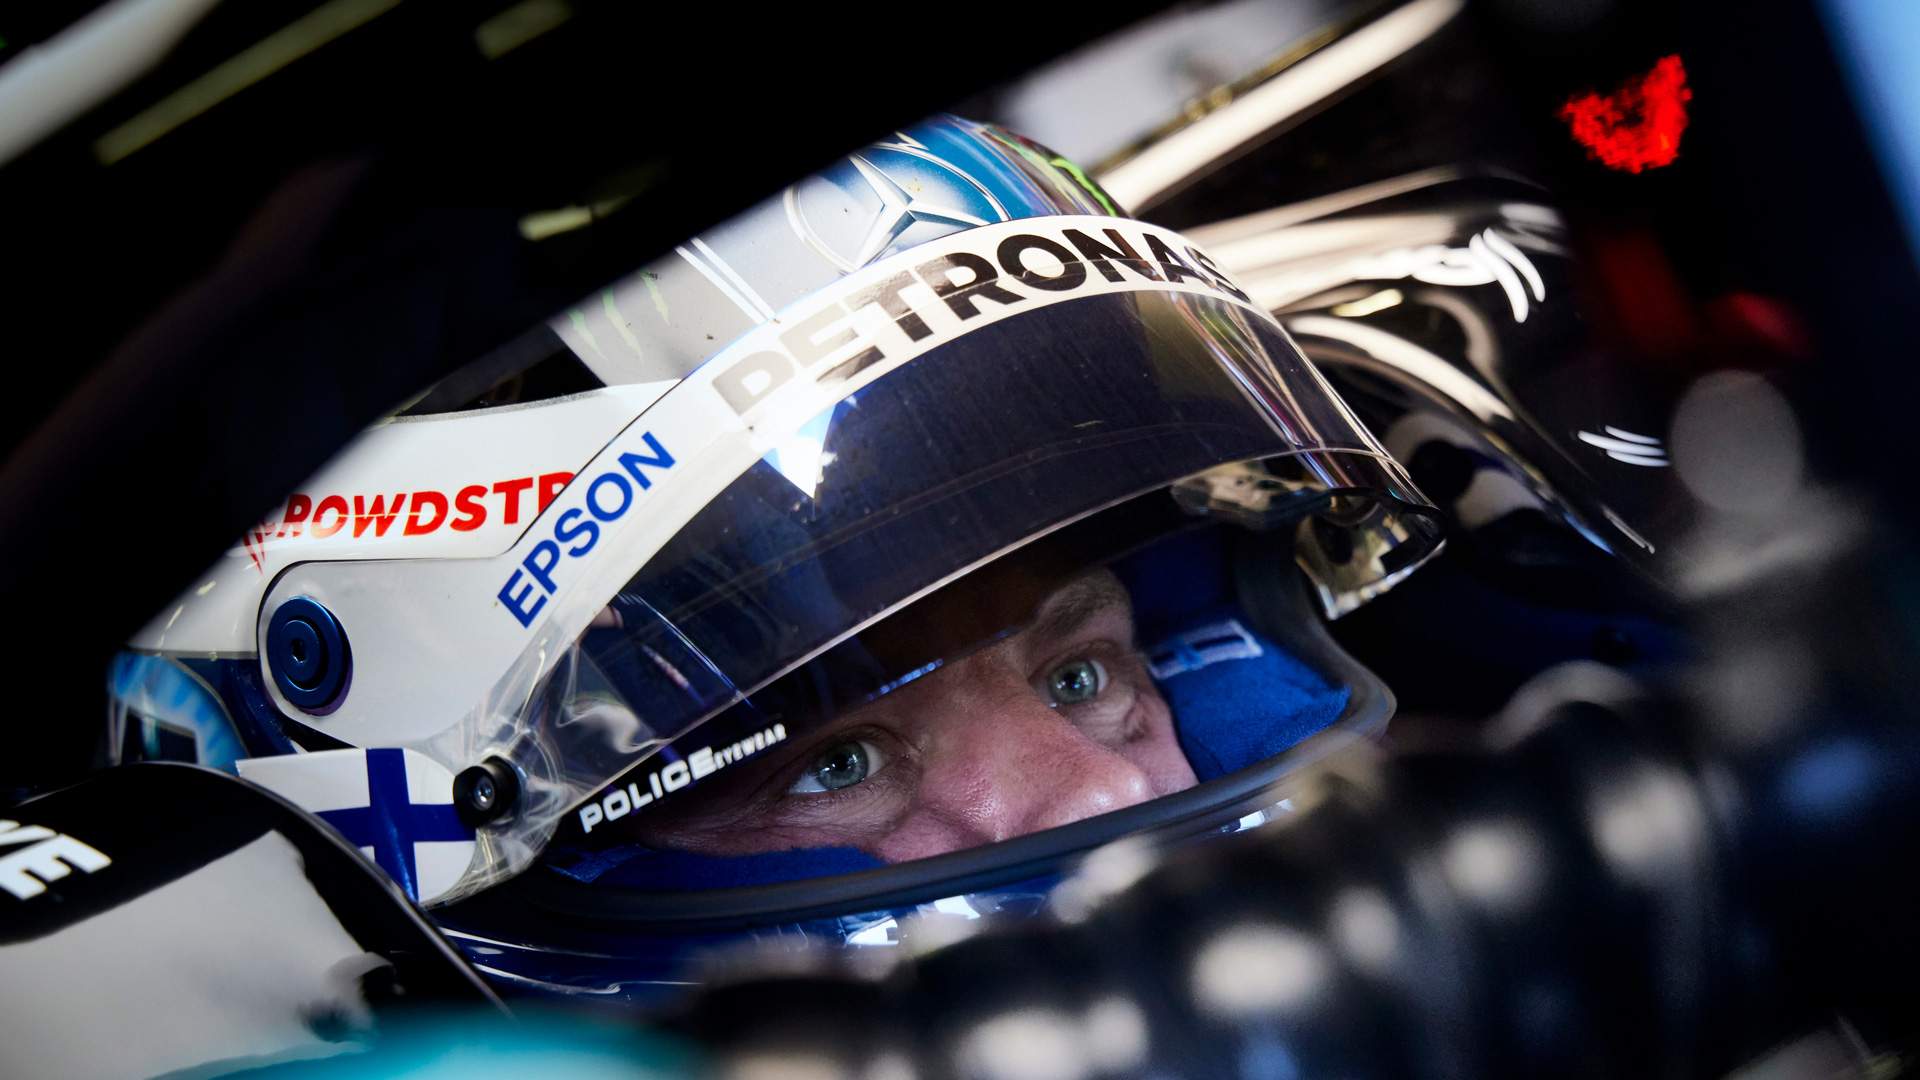 DRIVER MARKET: Bottas expects to discuss Mercedes future ‘in next month or so’